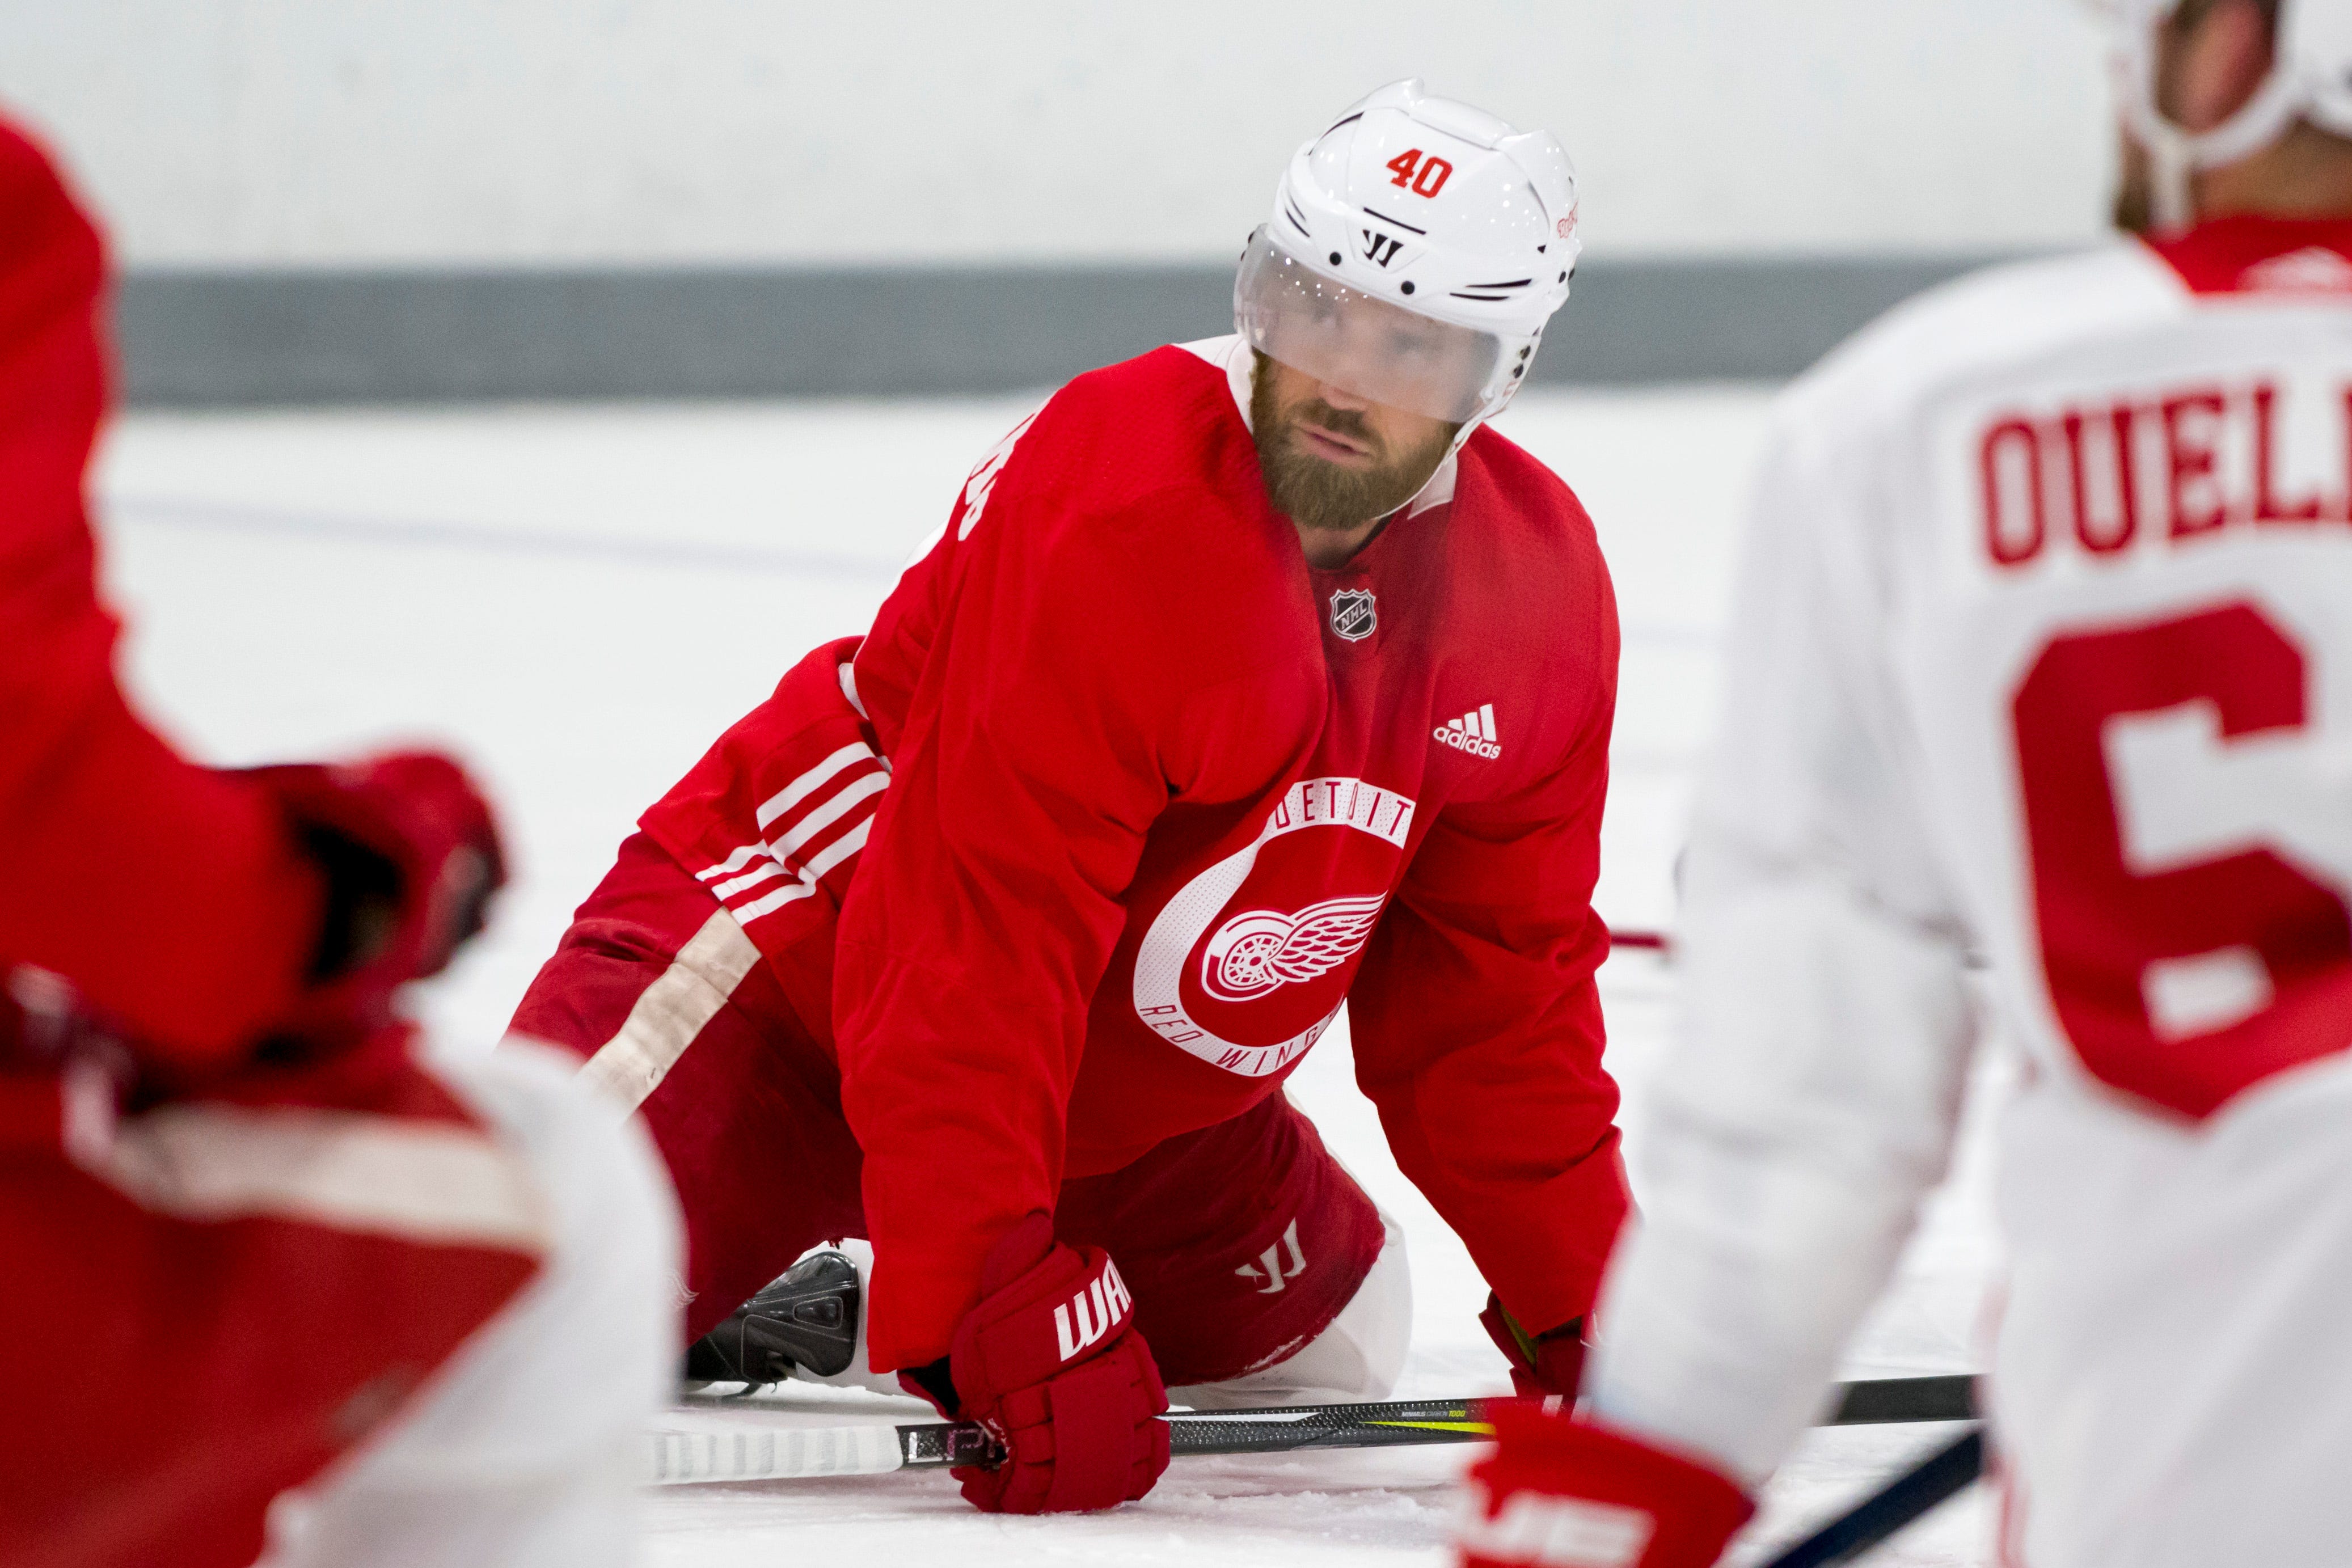 The facemark of center Henrik Zetterberg fogs up as he stretches before the workout in Traverse City on Sept. 15, 2017